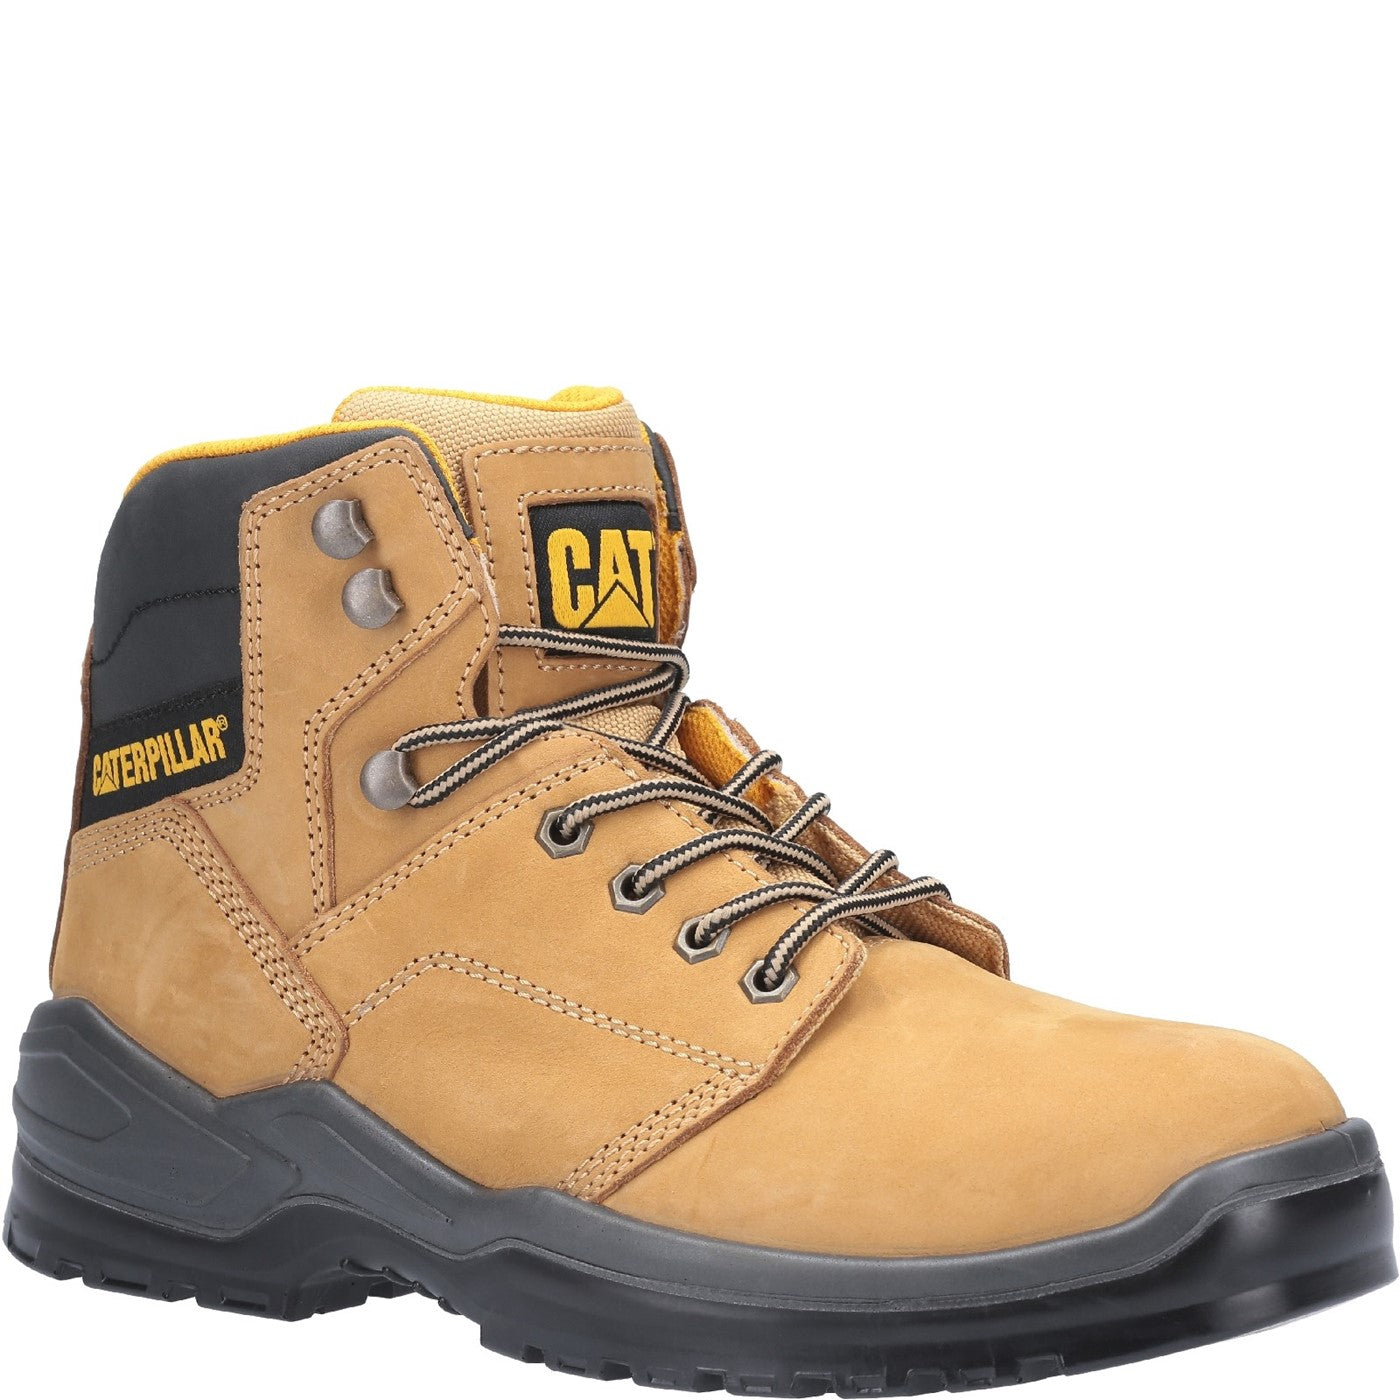 Men's Caterpillar Striver Injected Safety Boot